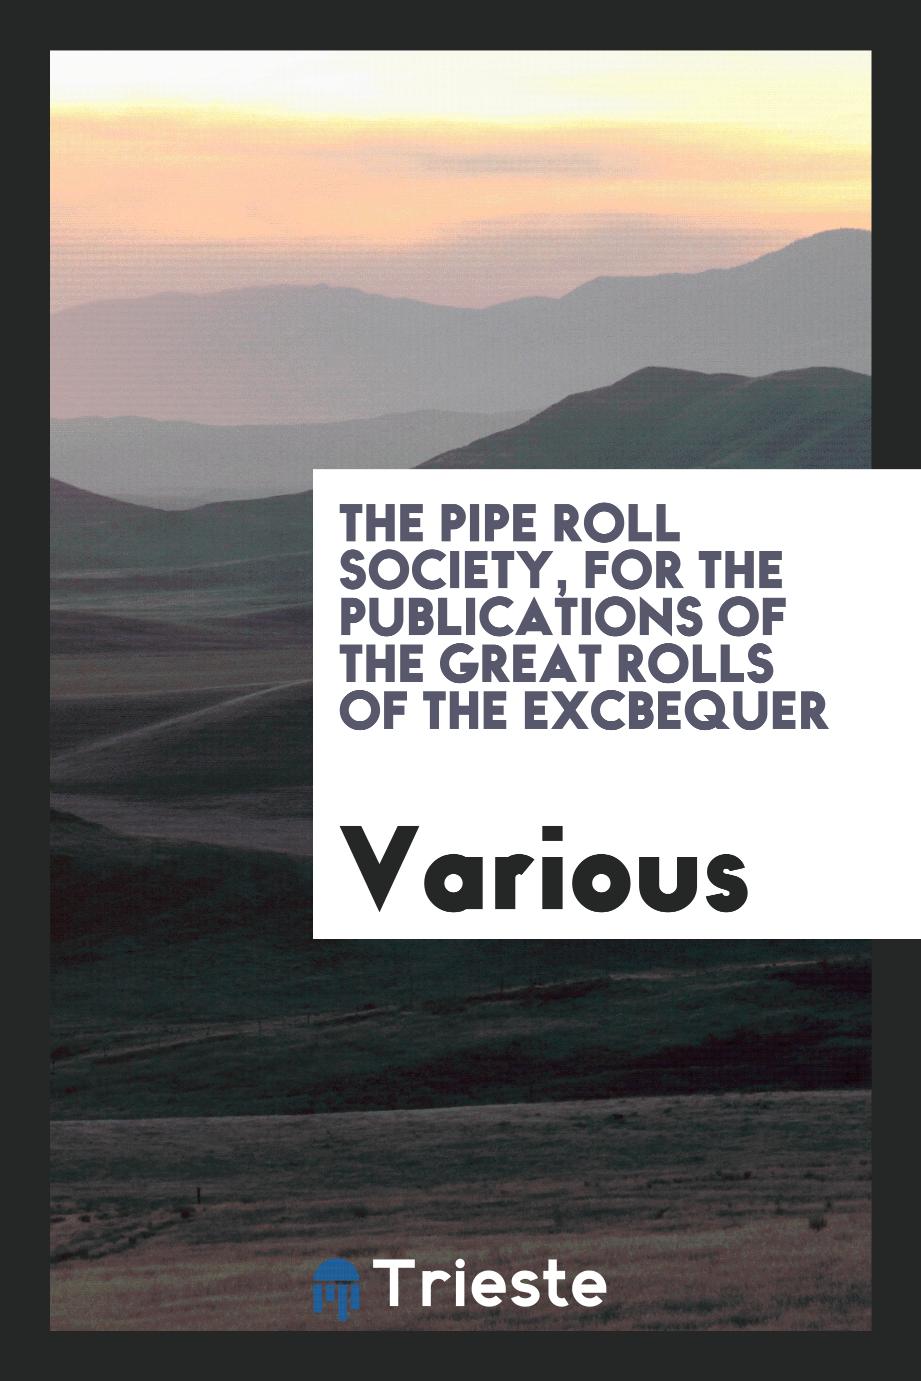 The Pipe Roll Society, for the Publications of the great rolls of the excbequer